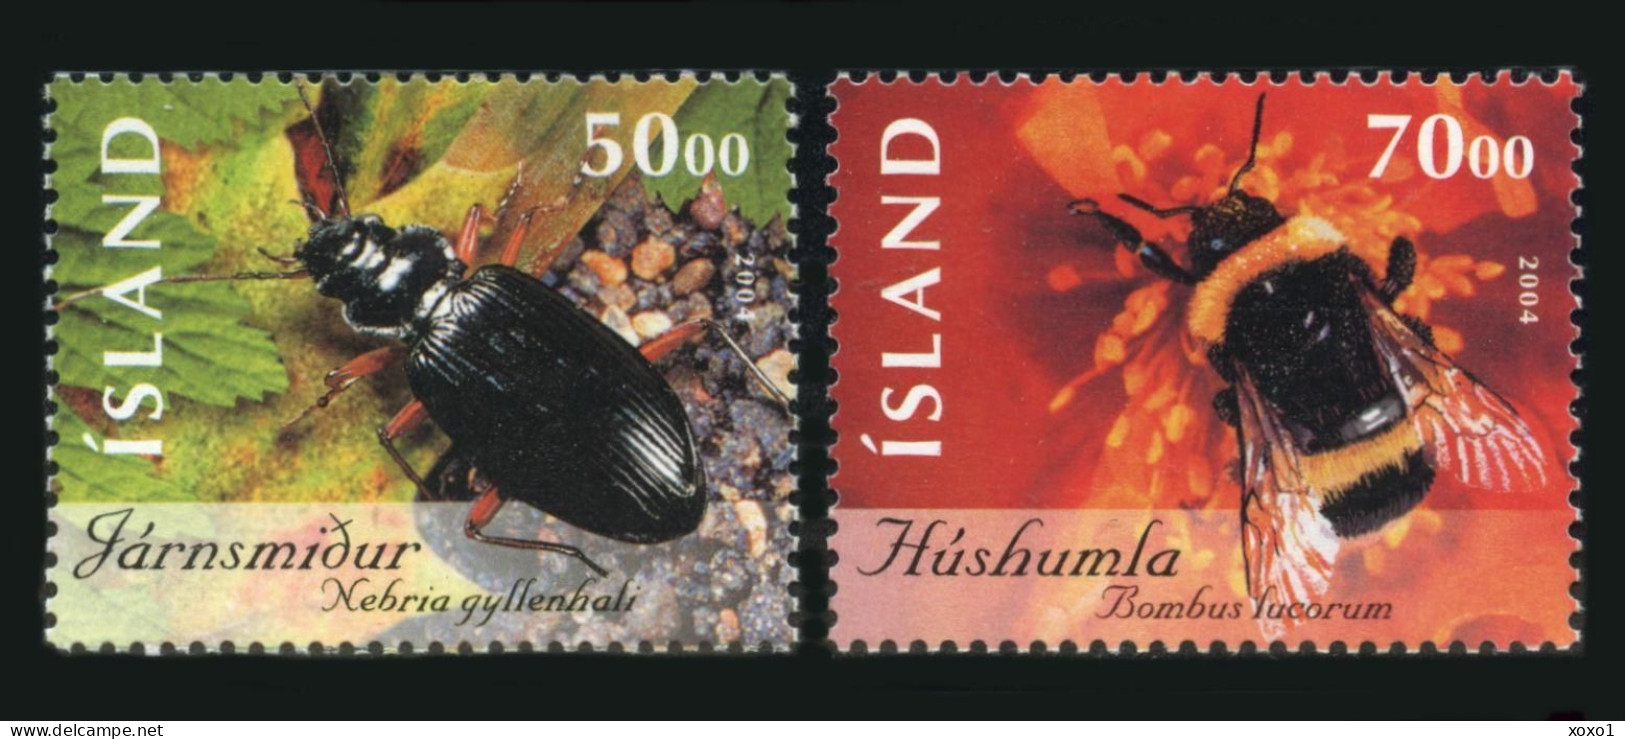 Iceland 2004 MiNr. 1075 - 1076 Island Insects And Spiders  # 1     2v  MNH** 3.50 € - Käfer